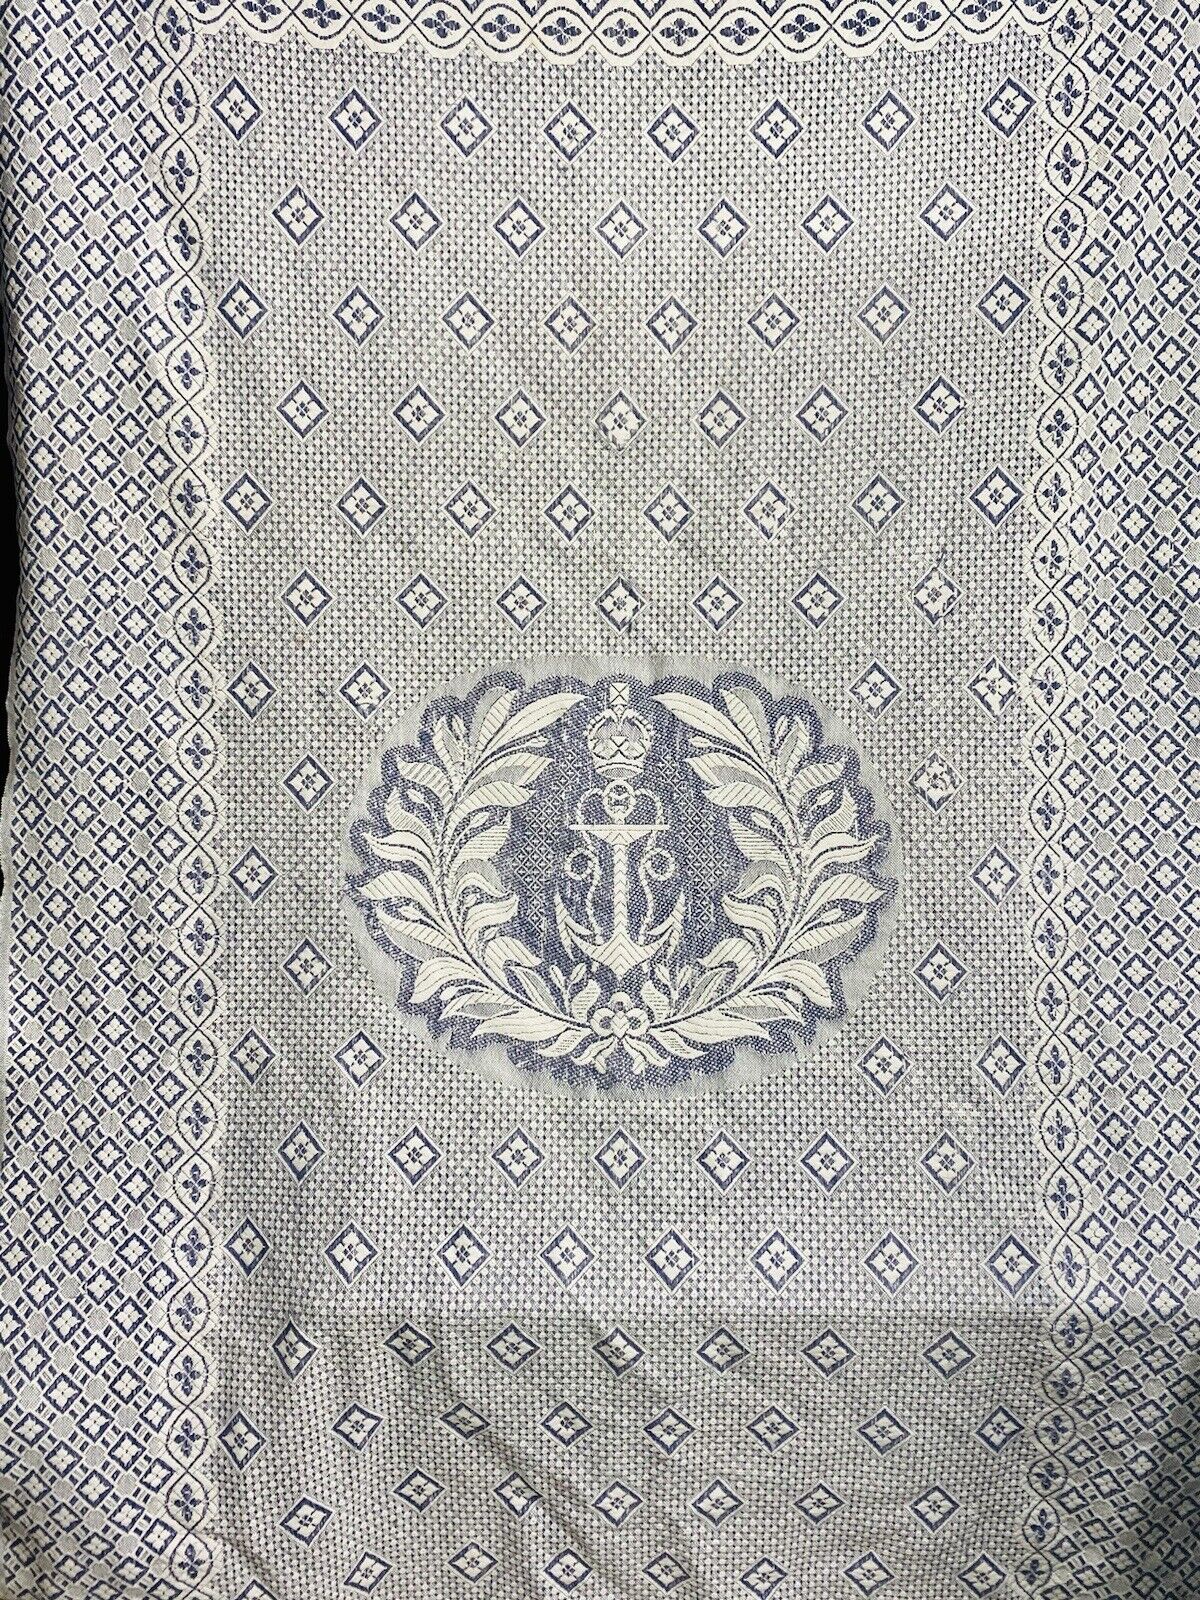 Two Royal Navy Counterpanes (bedspreads)